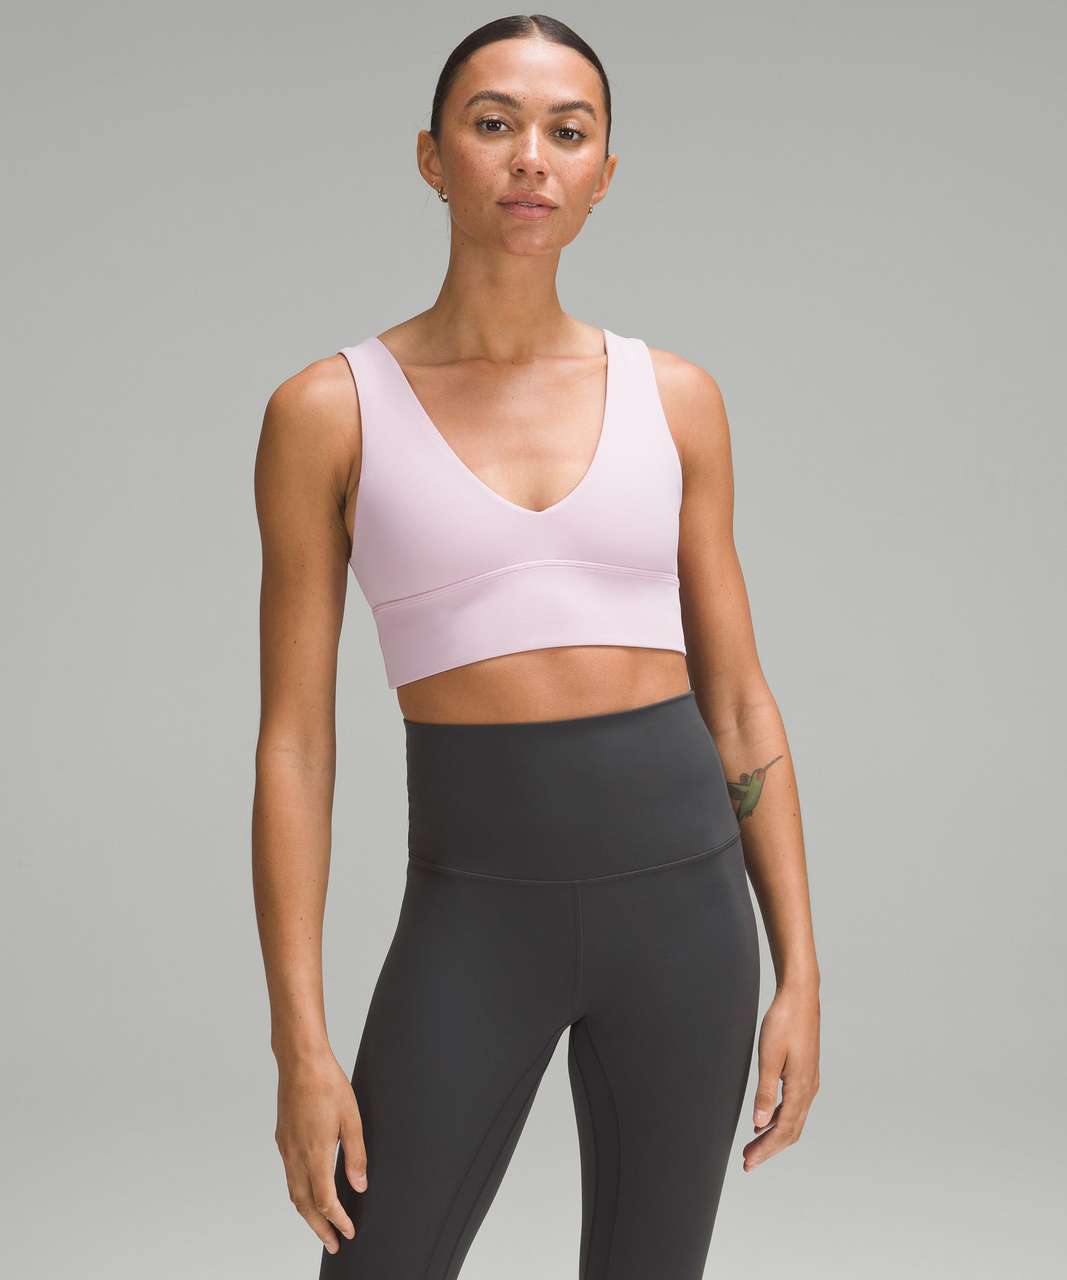 lululemon Align™ Reversible Bra Light Support, A/B Cups white/pink mist  size4 NWT